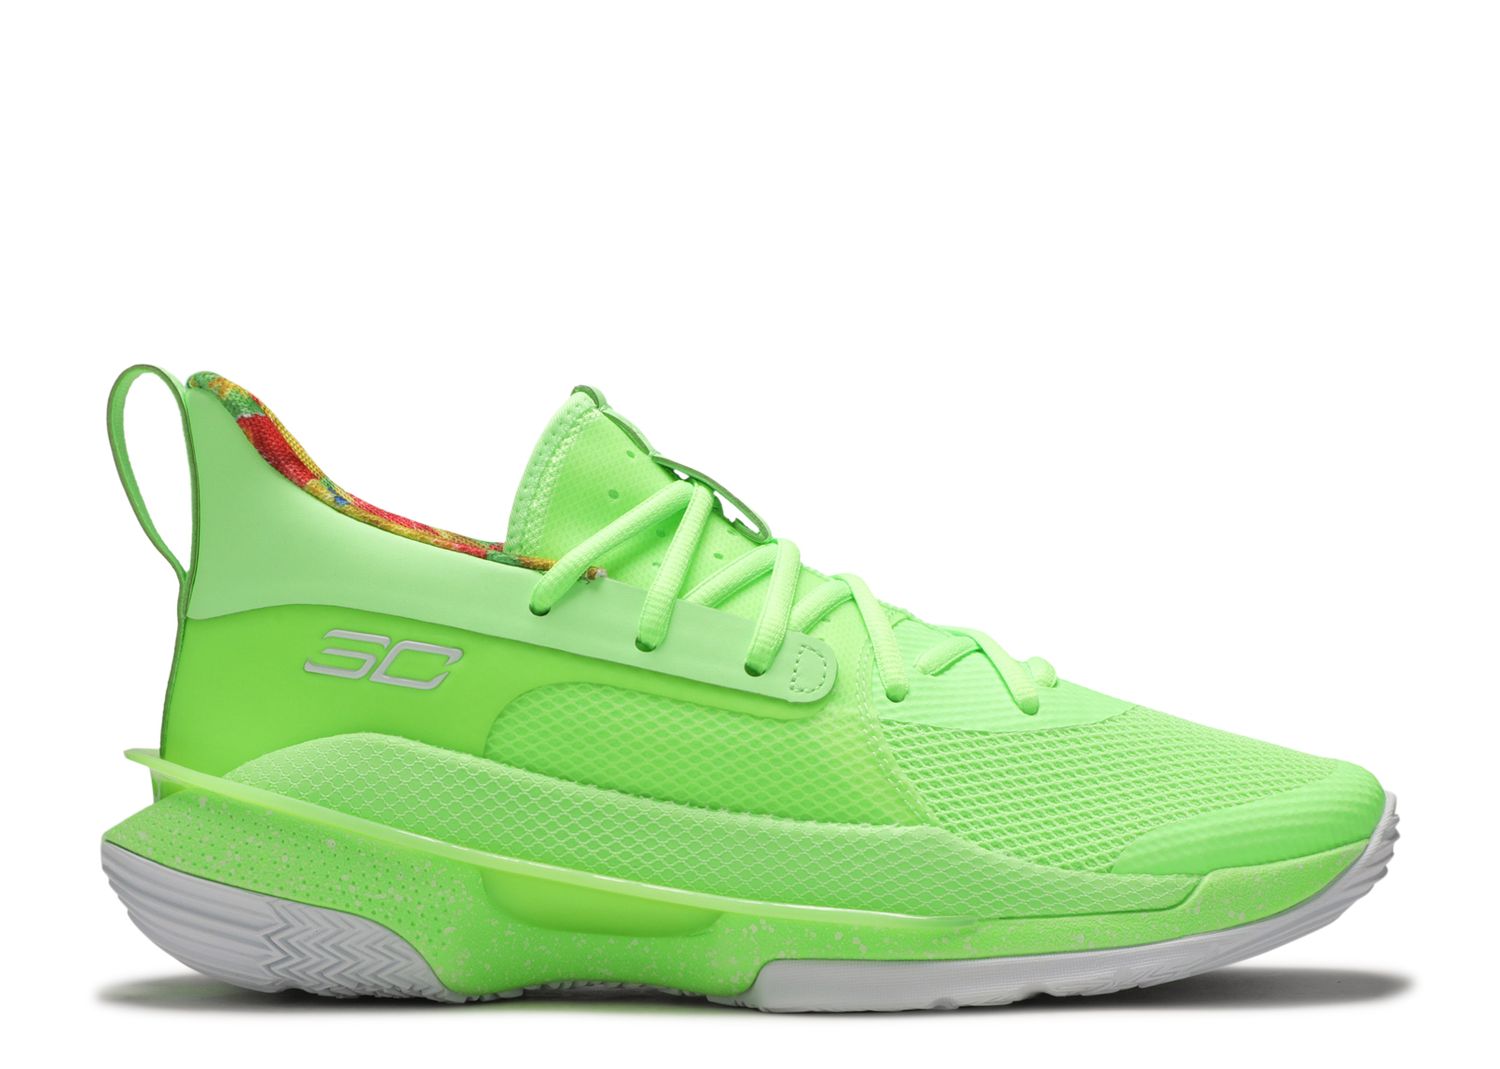 Sour Patch Kids X Curry 7 'Lime' - Under Armour - 3021258 302 ...